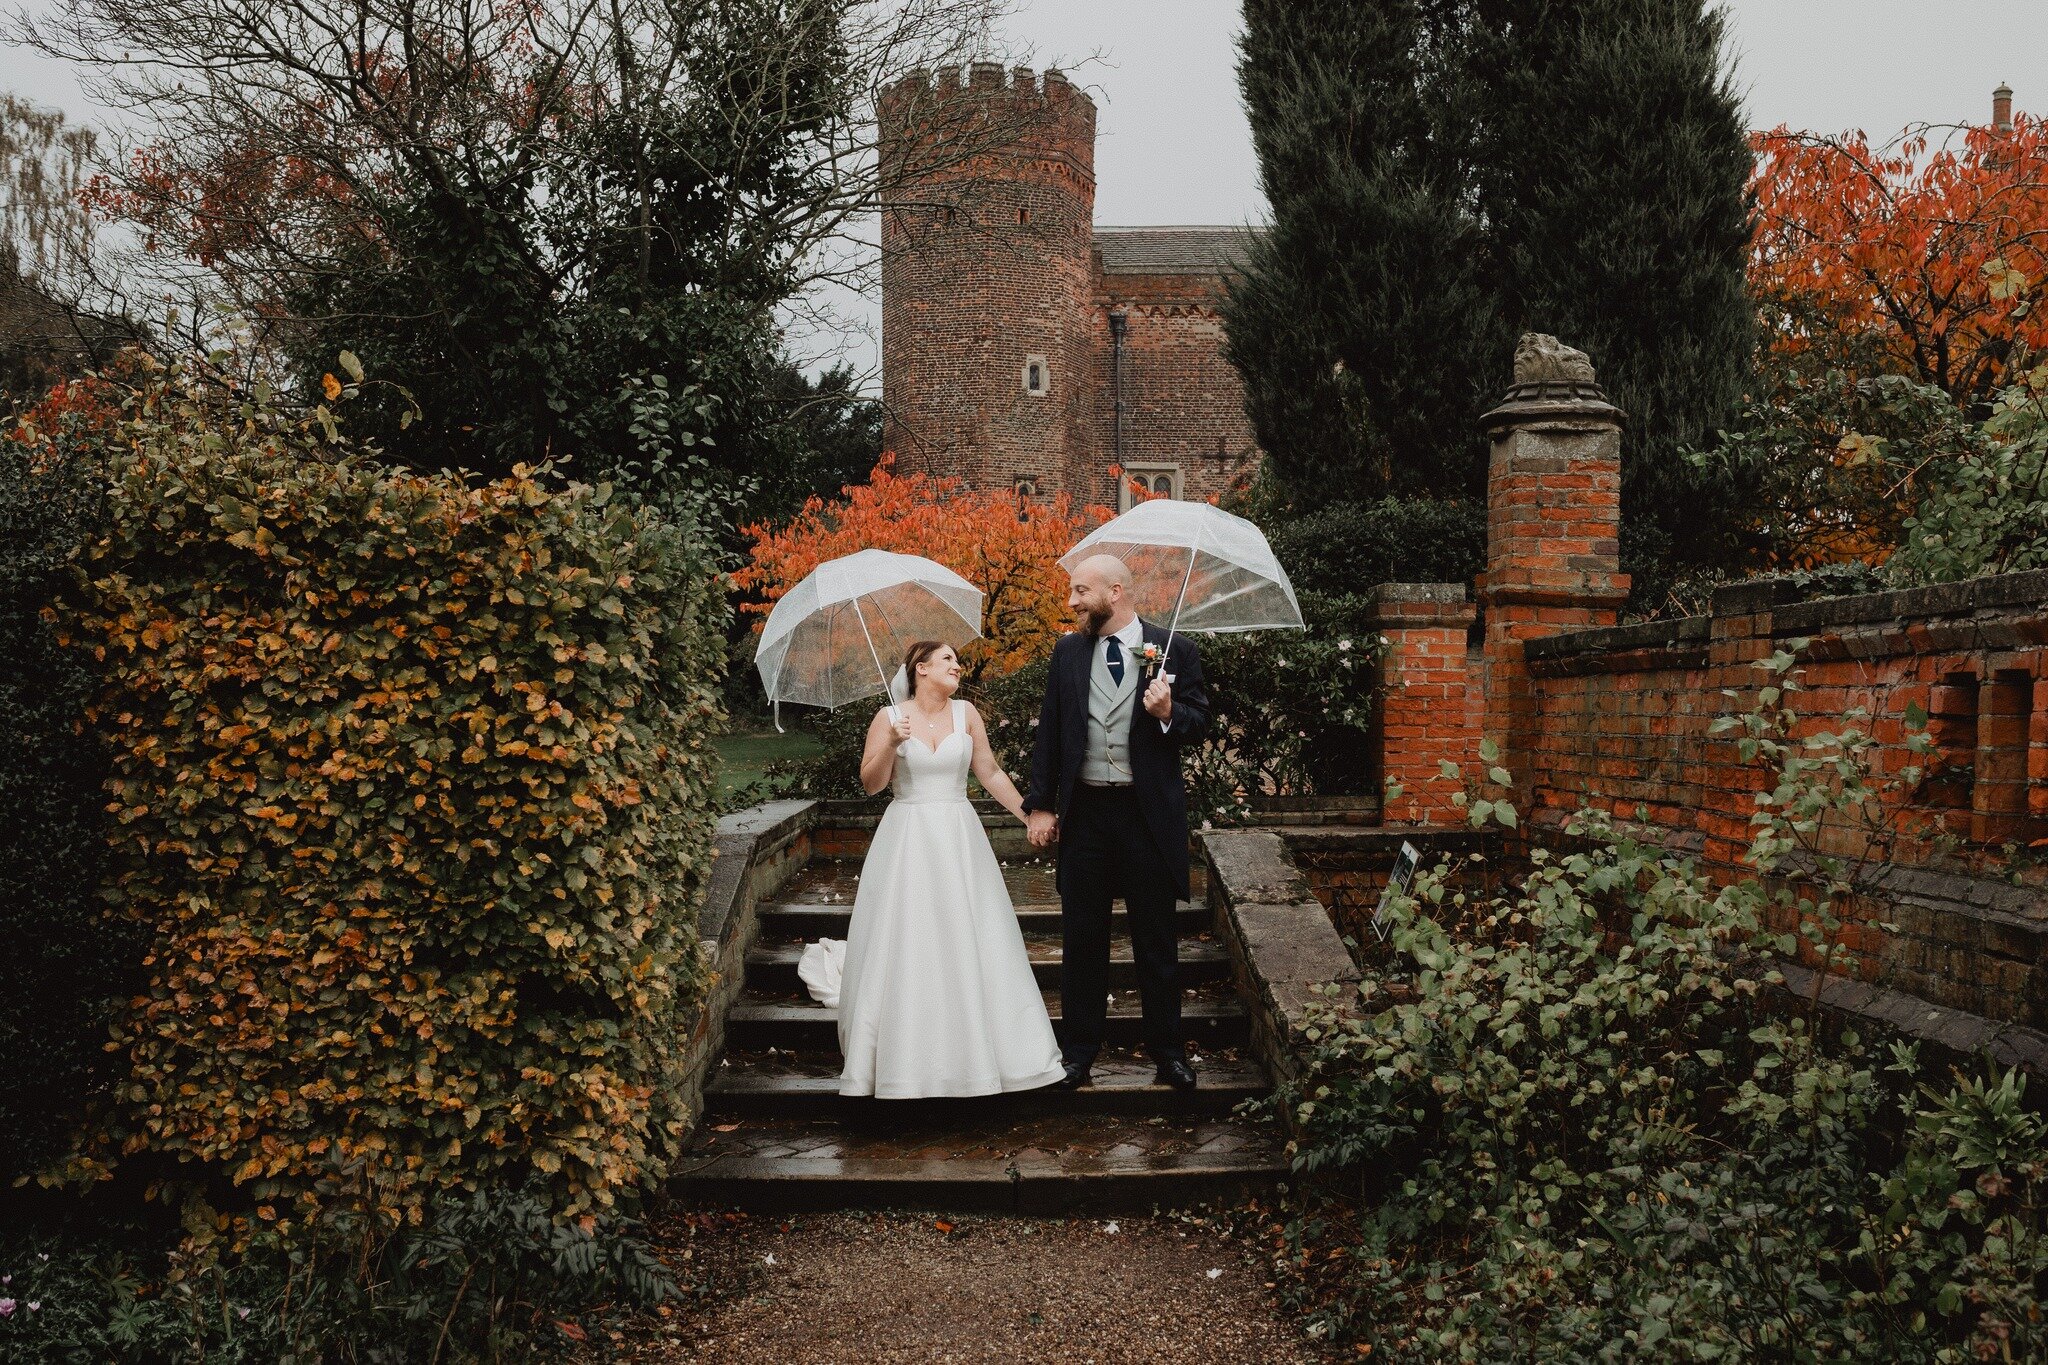 // K + T //

This weekend K + T tied the knot in the stunning @hodsock.priory  in Nottinghamshire. 

Autumn colours, rain filled skies, log fires, great friends and family and one hell of a celebration!!! 

Cheers to you two! 

-

𝚂𝚞𝚛𝚛𝚘𝚞𝚗𝚍𝚎?